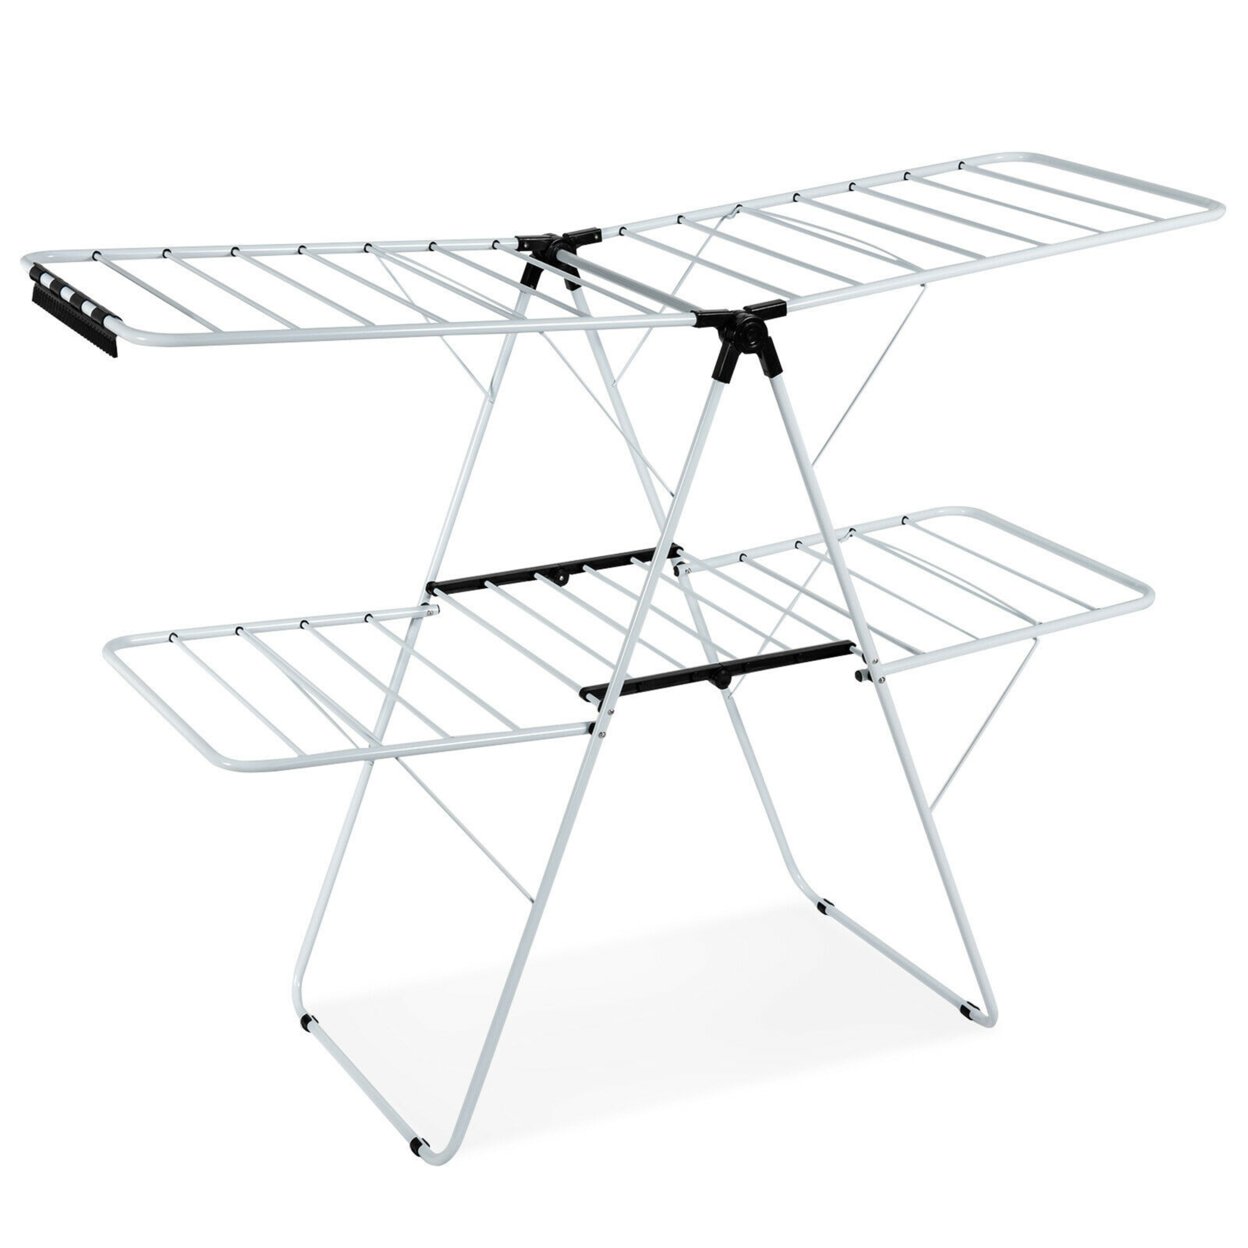 2-Level Clothes Drying Rack Foldable Airer W/ Height-Adjustable Gullwing